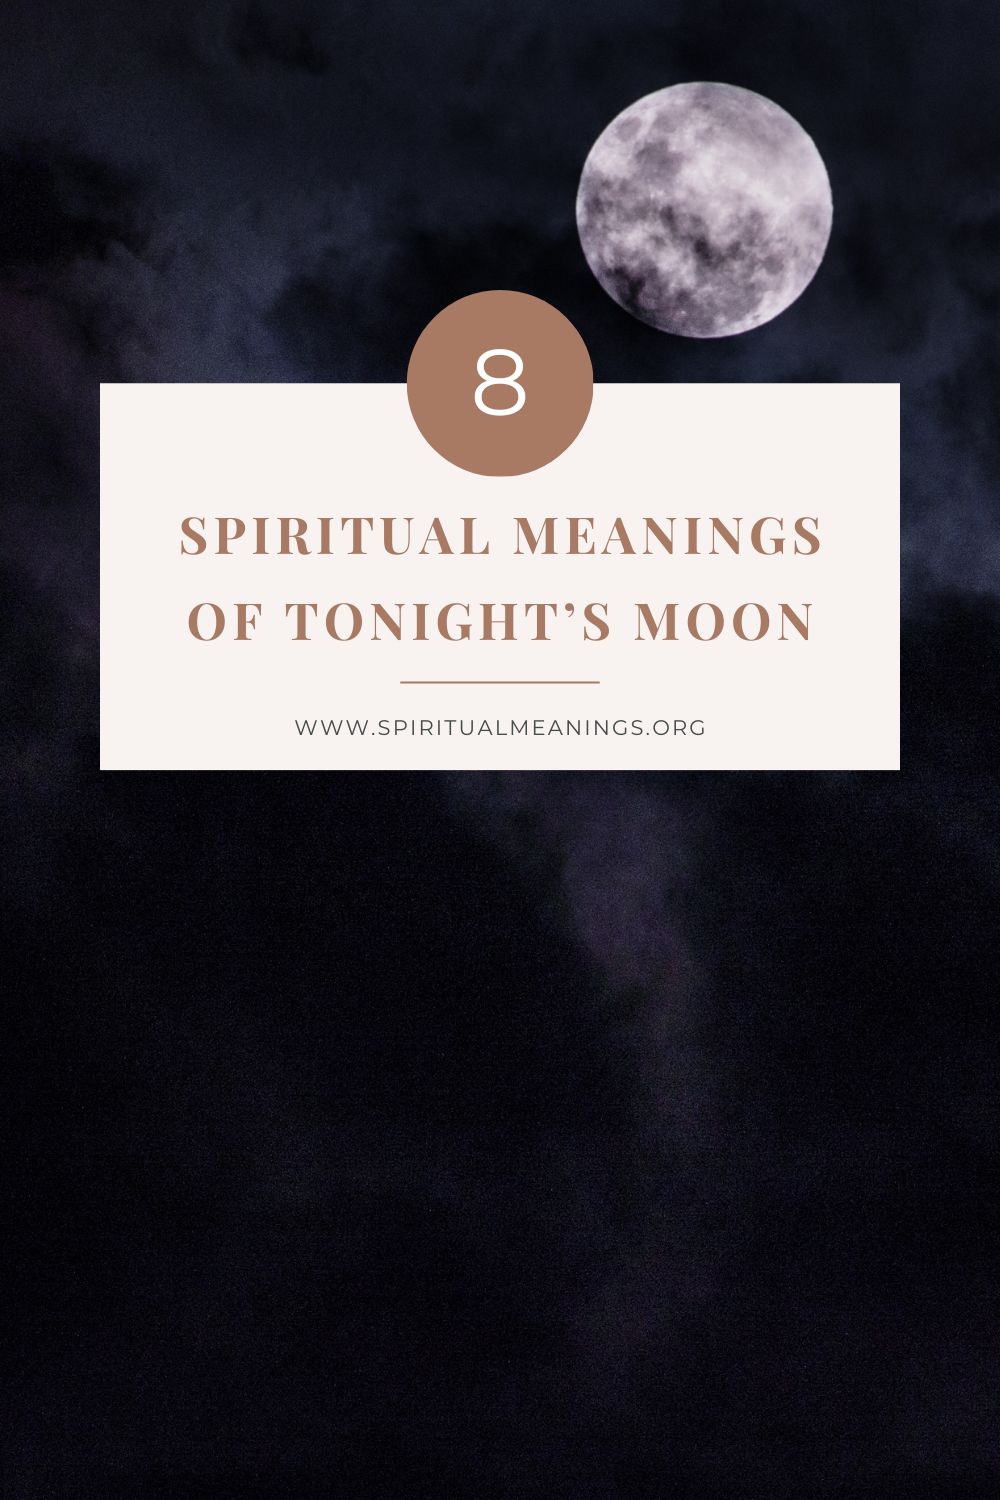 Spiritual Meanings of Tonight’s Moon